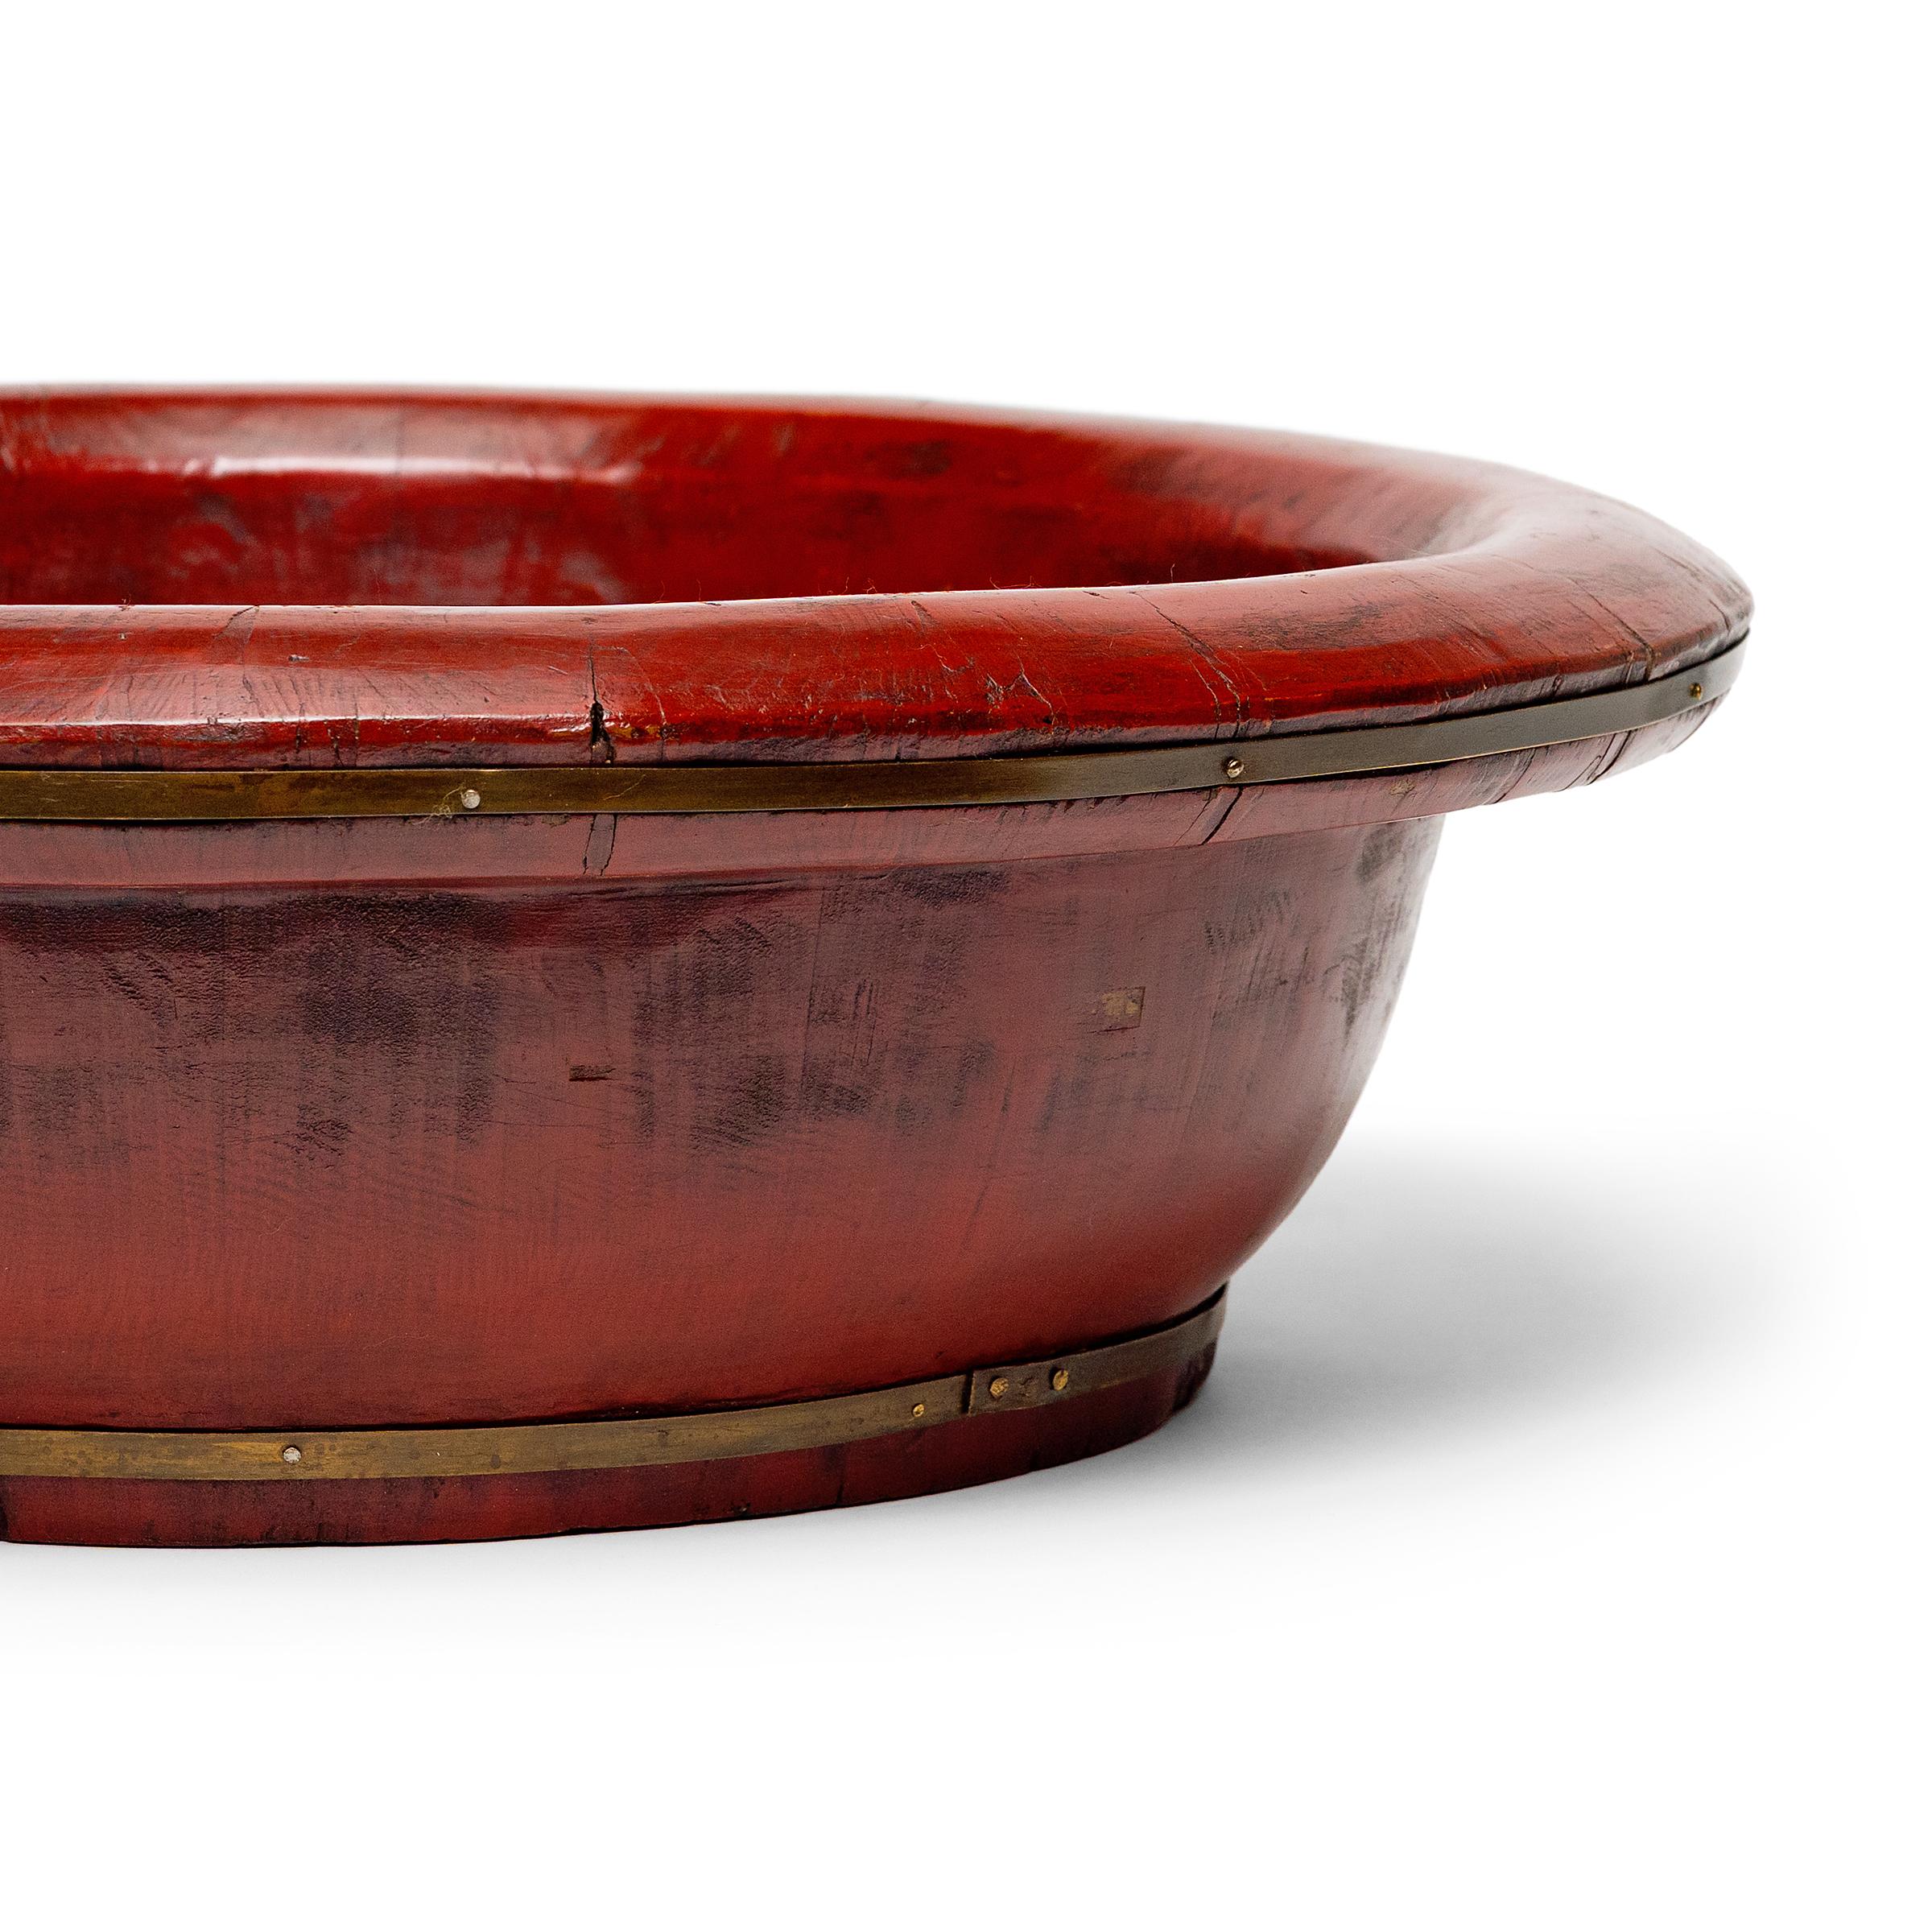 Qing Chinese Red Lacquer Wash Basin, c. 1880